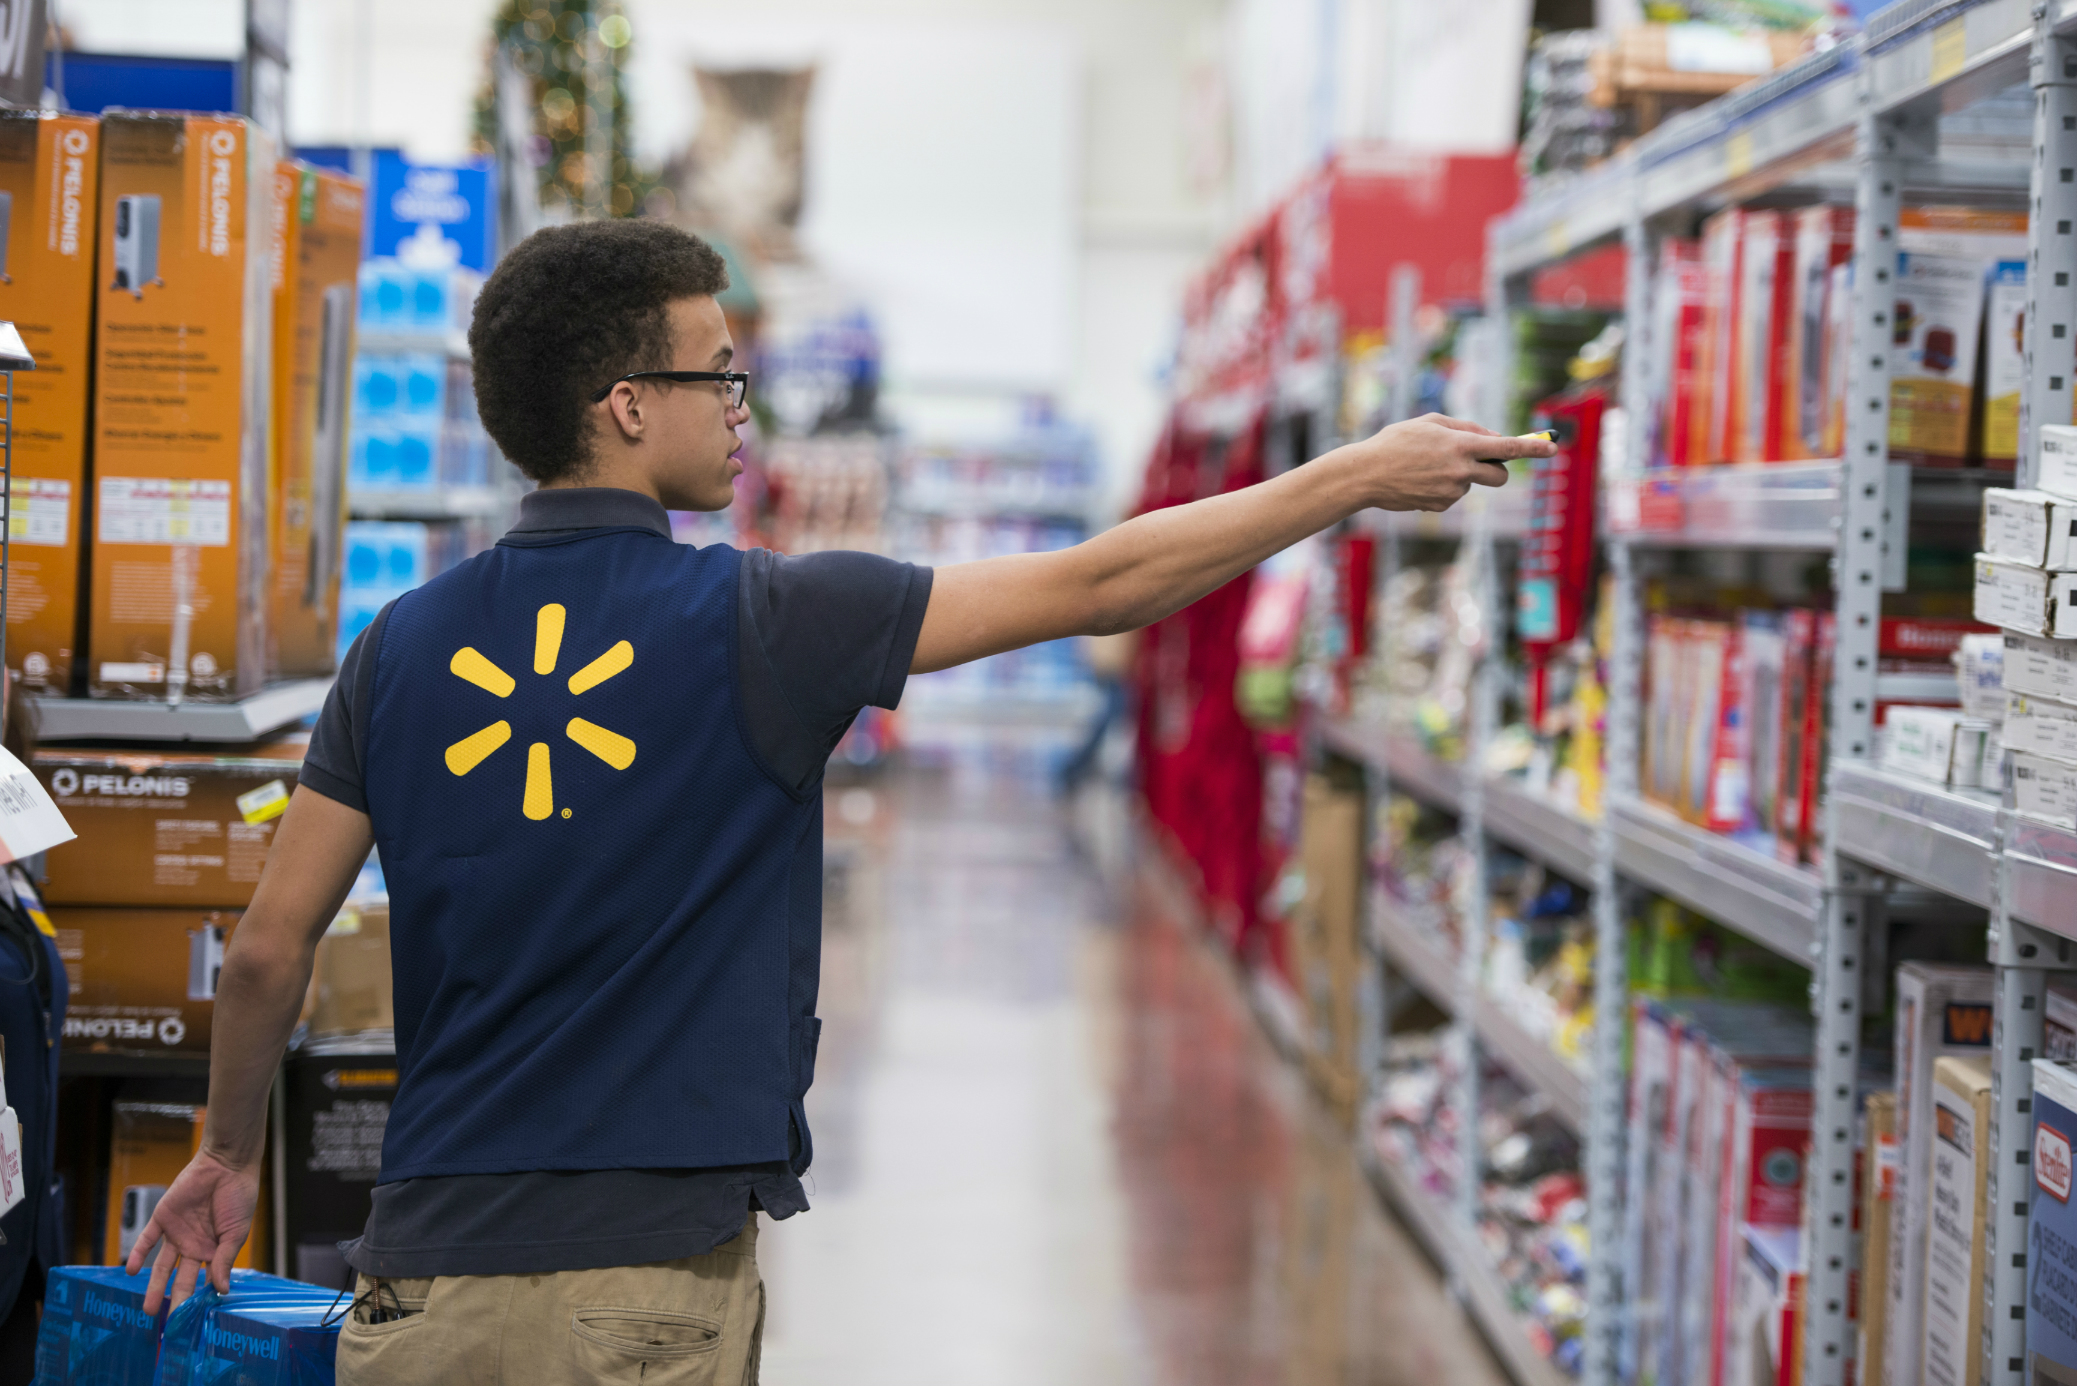 Walmart Wants its Suppliers to Apply Blockchain Technology.